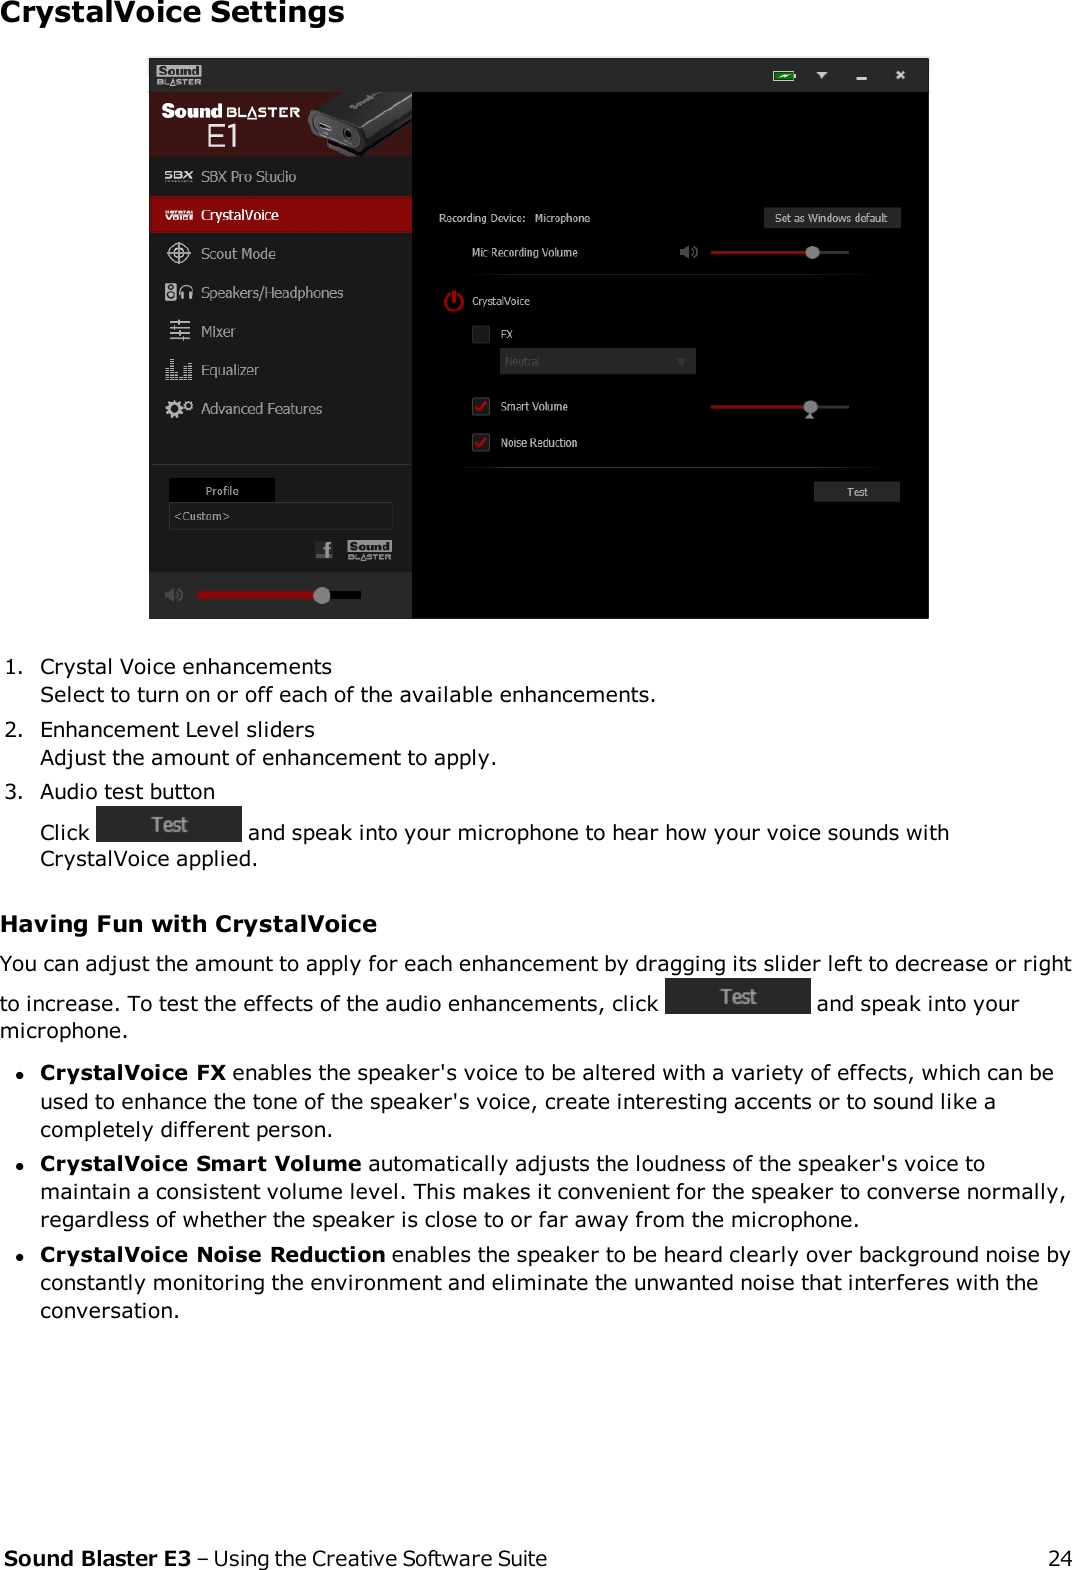 CrystalVoice Settings1. Crystal Voice enhancementsSelect to turn on or off each of the available enhancements.2. Enhancement Level slidersAdjust the amount of enhancement to apply.3. Audio test buttonClick and speak into your microphone to hear how your voice sounds withCrystalVoice applied.Having Fun with CrystalVoiceYou can adjust the amount to apply for each enhancement by dragging its slider left to decrease or rightto increase. To test the effects of the audio enhancements, click and speak into yourmicrophone.lCrystalVoice FX enables the speaker&apos;s voice to be altered with a variety of effects, which can beused to enhance the tone of the speaker&apos;s voice, create interesting accents or to sound like acompletely different person.lCrystalVoice Smart Volume automatically adjusts the loudness of the speaker&apos;s voice tomaintain a consistent volume level. This makes it convenient for the speaker to converse normally,regardless of whether the speaker is close to or far away from the microphone.lCrystalVoice Noise Reduction enables the speaker to be heard clearly over background noise byconstantly monitoring the environment and eliminate the unwanted noise that interferes with theconversation.Sound Blaster E3 – Using the Creative Software Suite 24